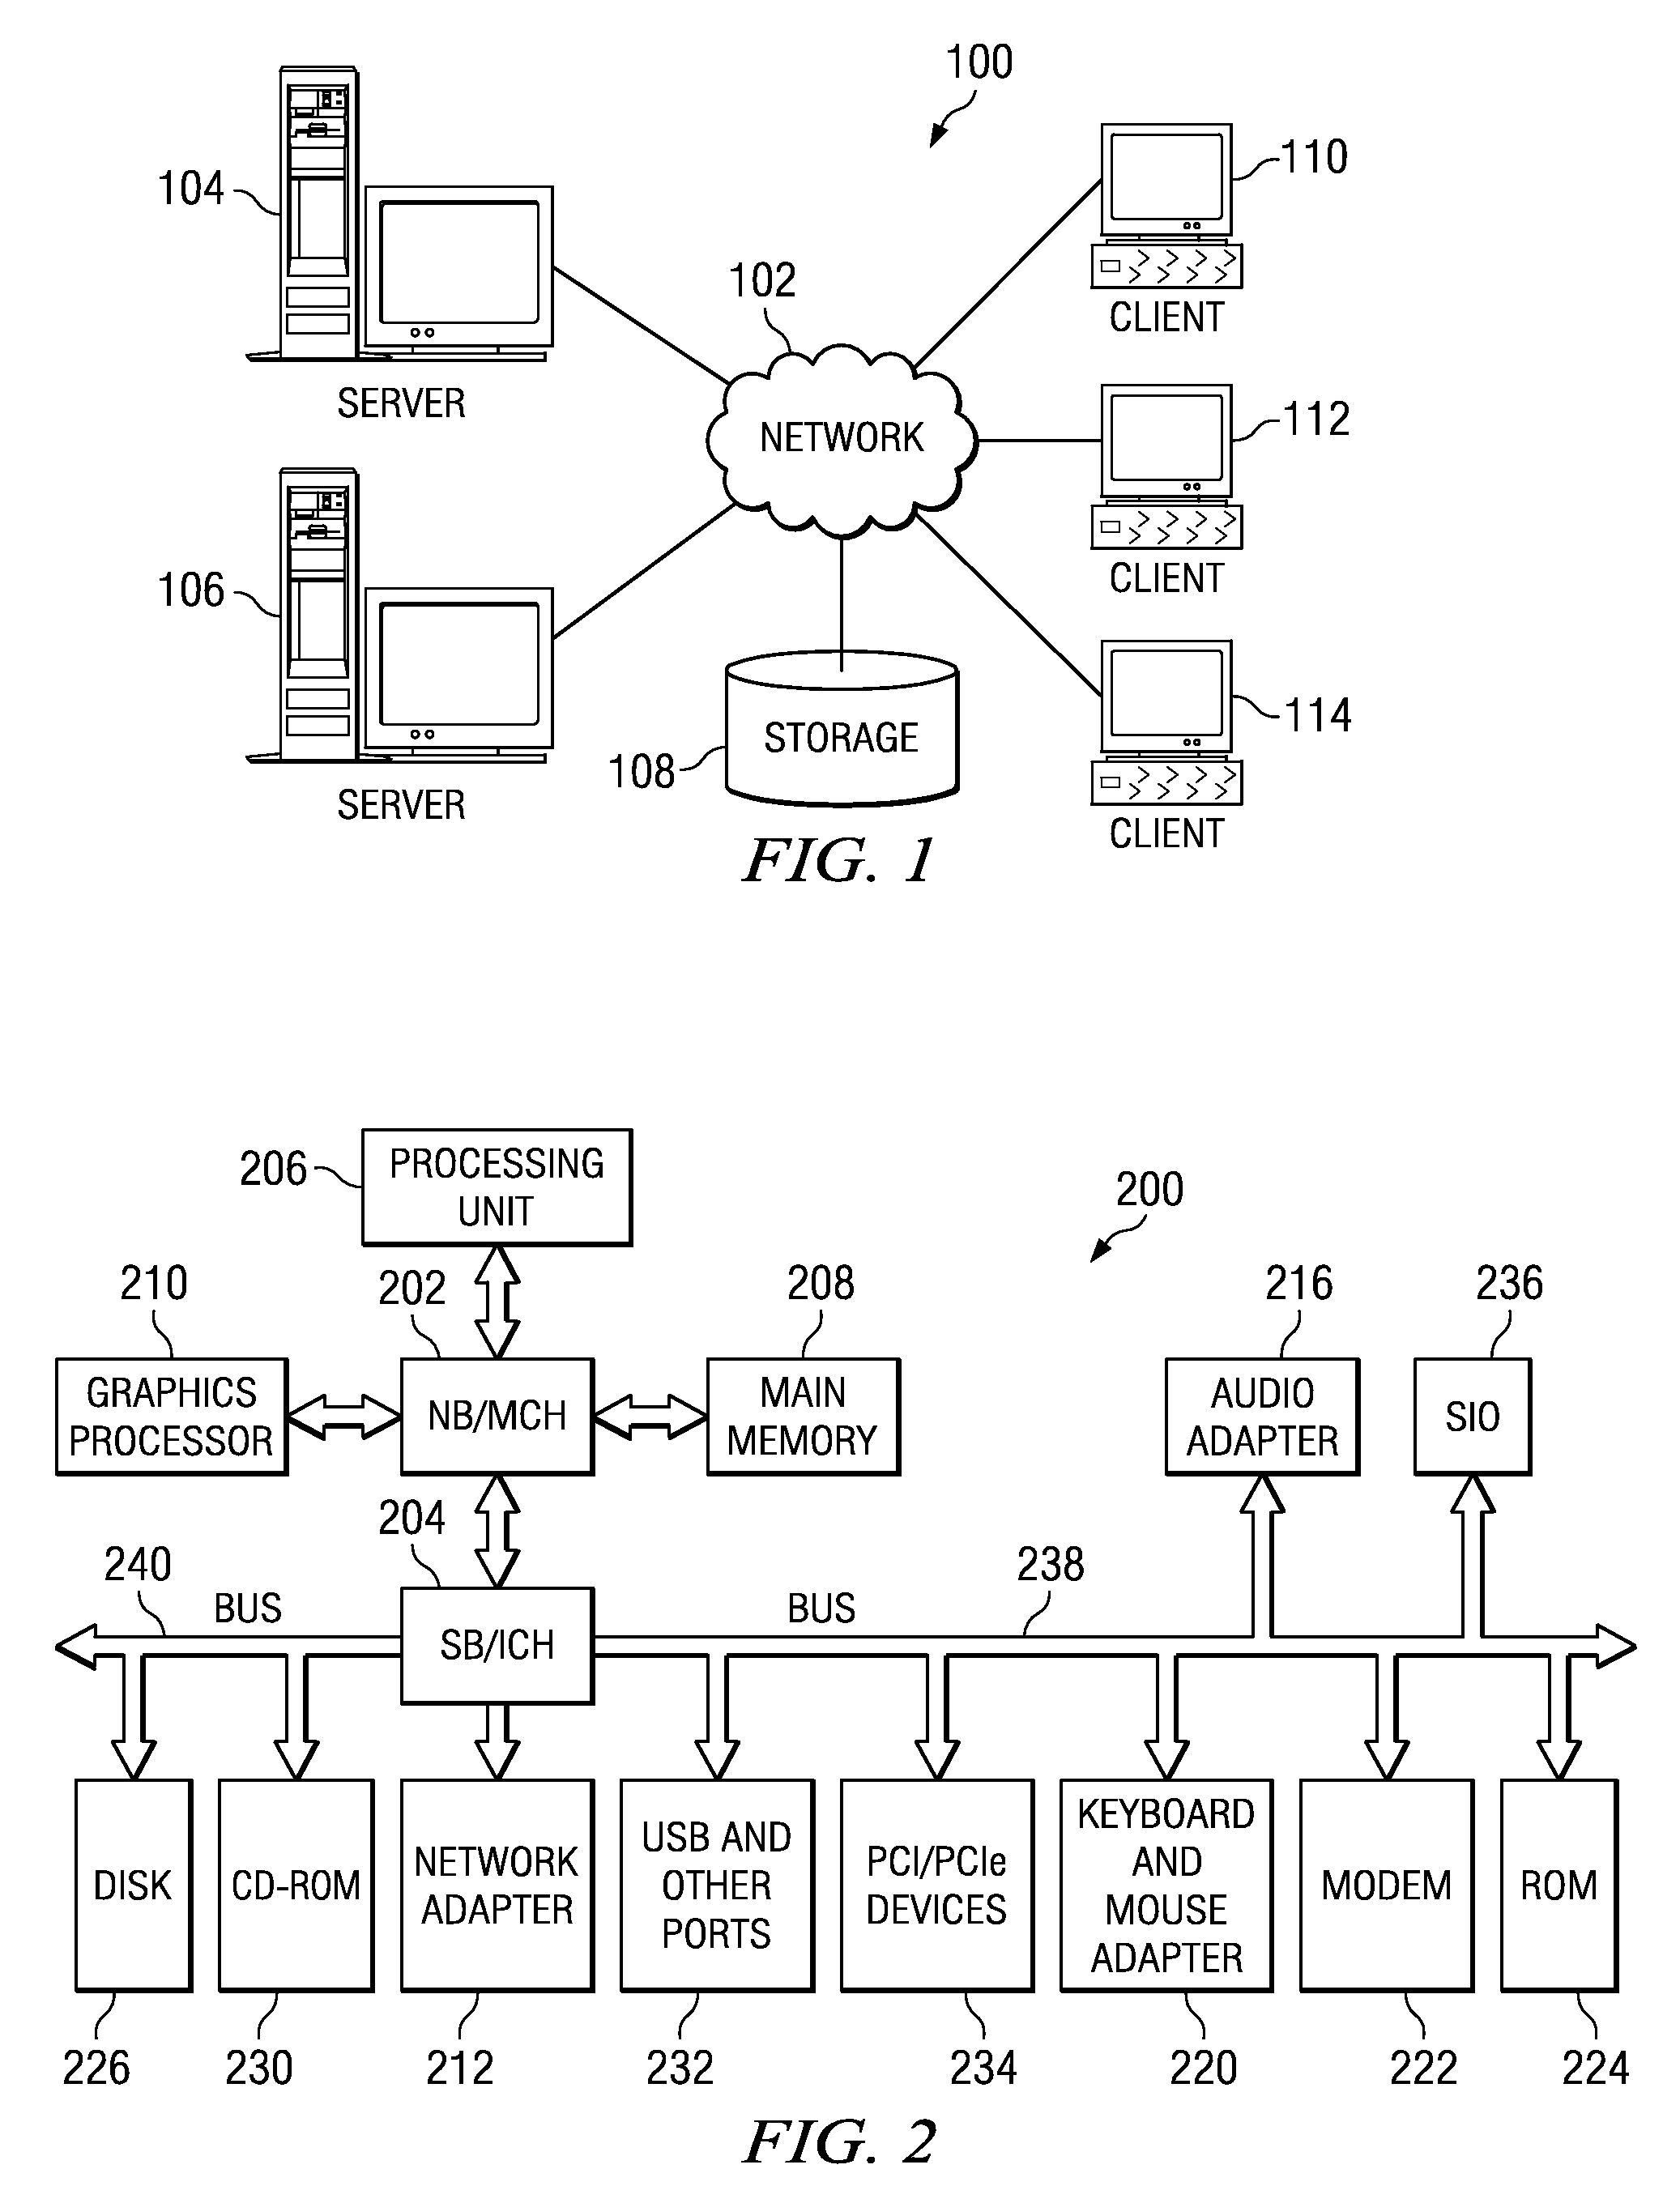 File fragment trading based on rarity values in a segmented file sharing system